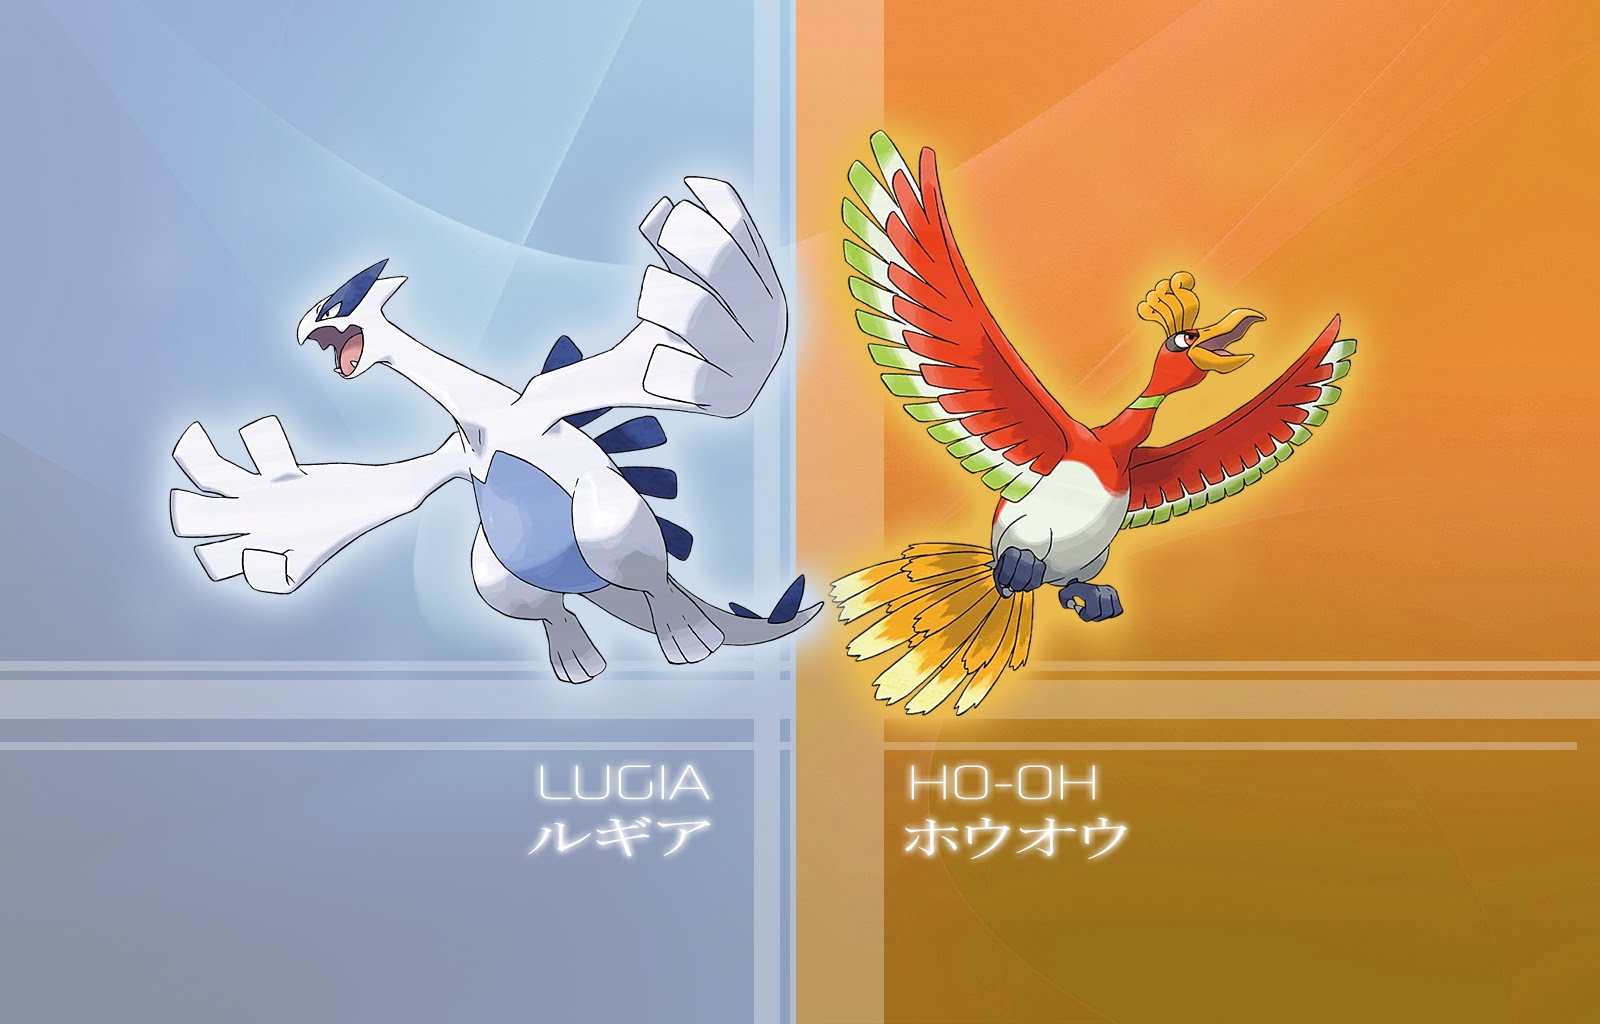 Which Legendary Pokemon is better - Ho-Oh or Lugia?